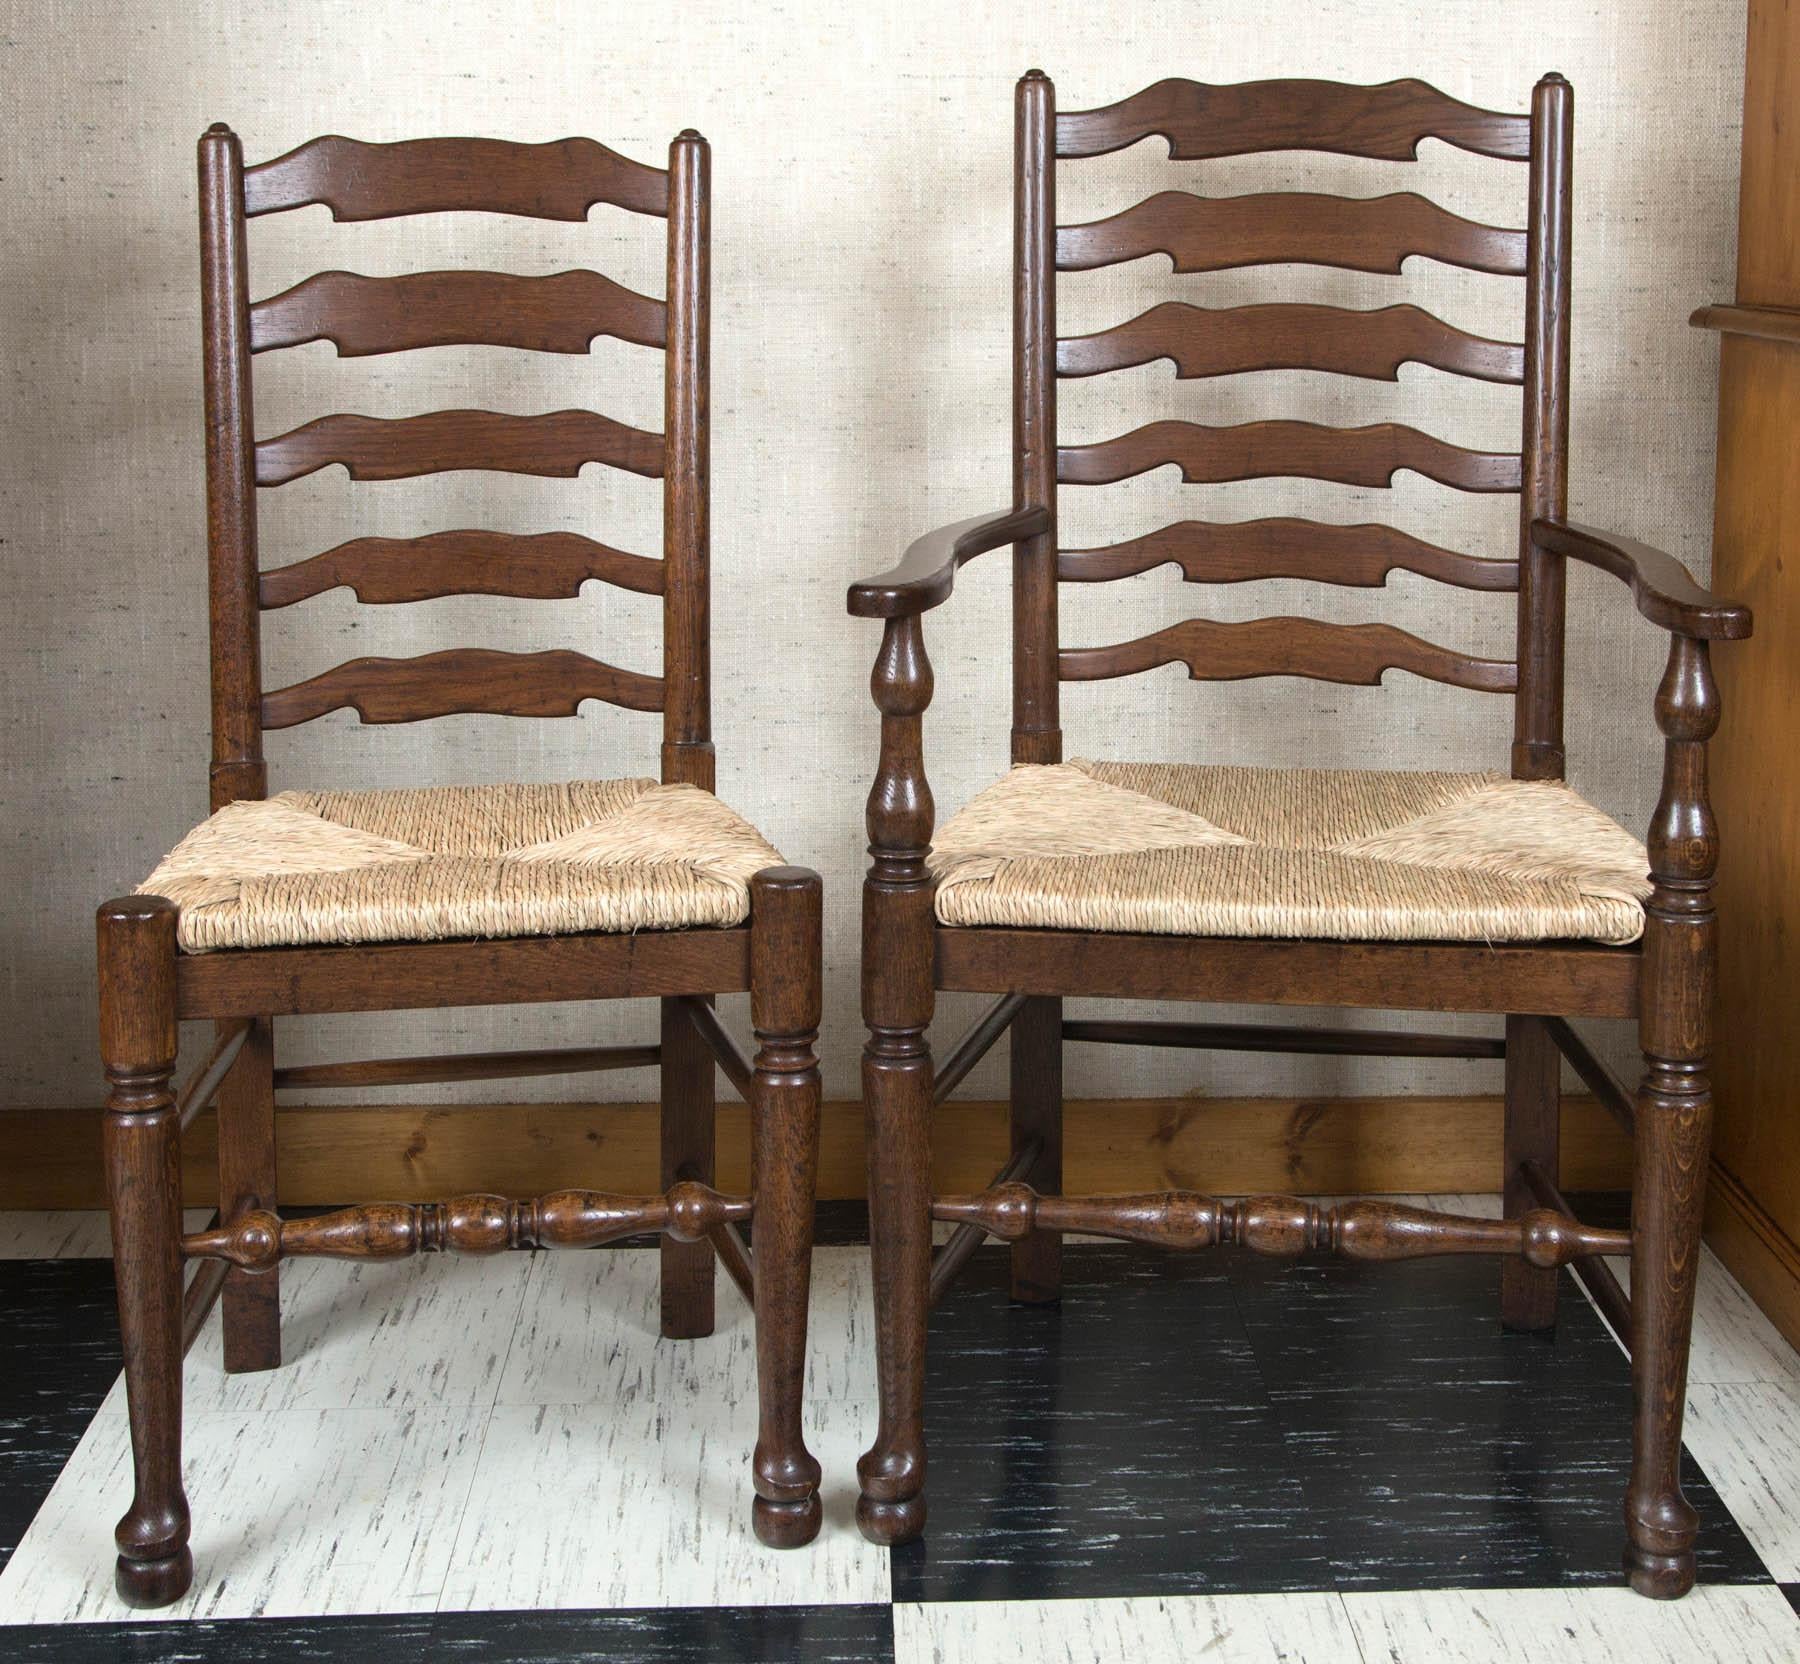 This is a set of eight (two arms, six sides) English wavy ladder back chairs just waiting for duty in a country kitchen. Sturdy oak construction ensures years of practical use while attention to details means these chairs will age gracefully. In a